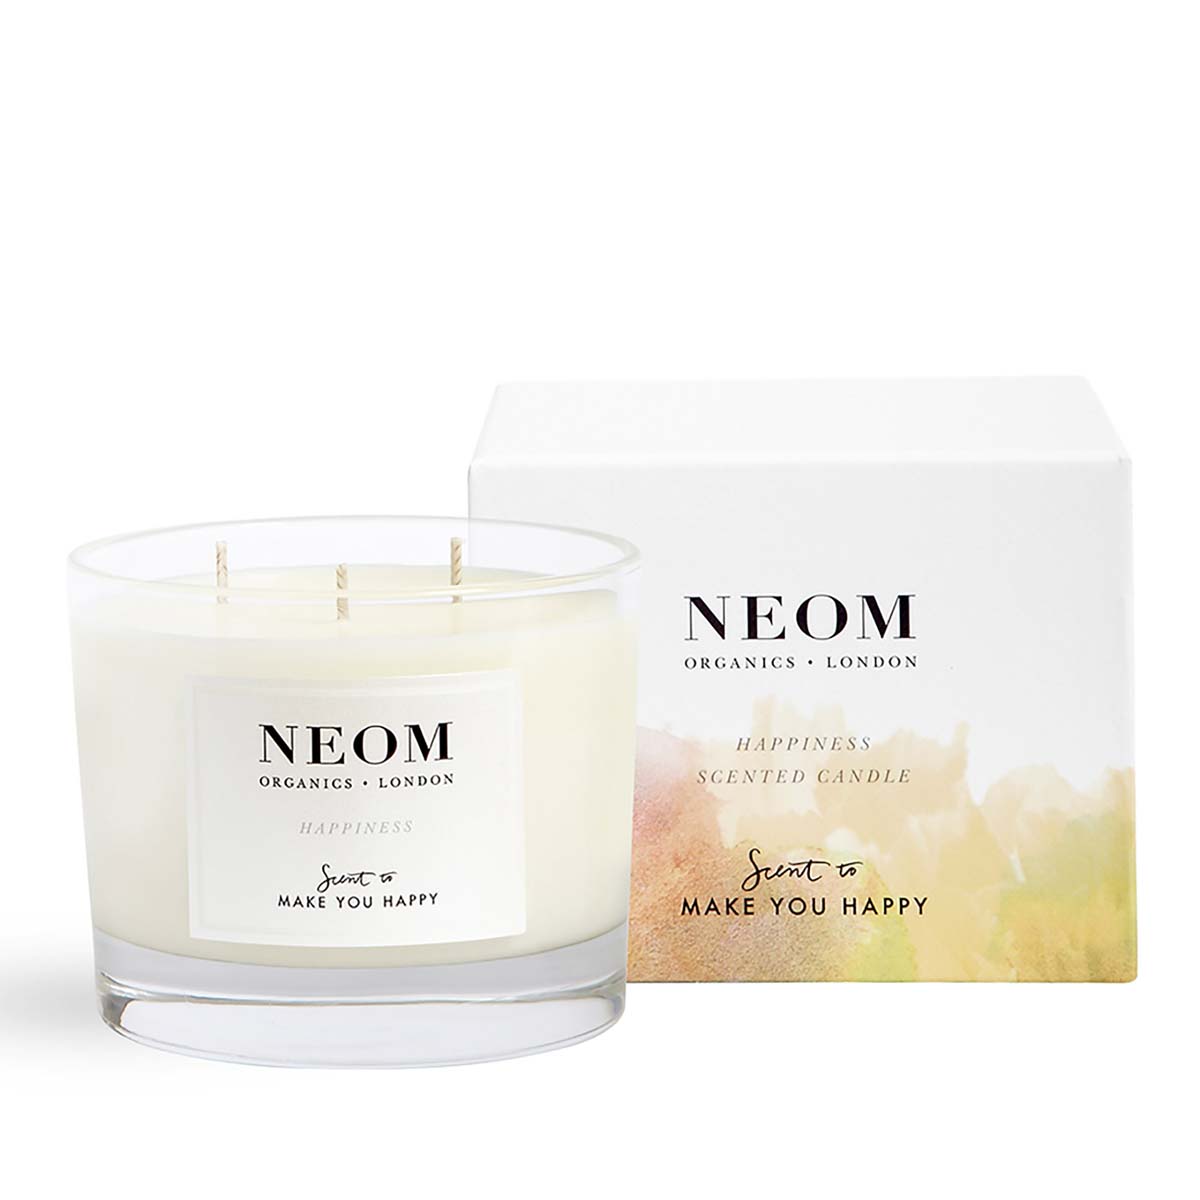 Neom Happiness™ Scented Candle (3 Wicks) 420g